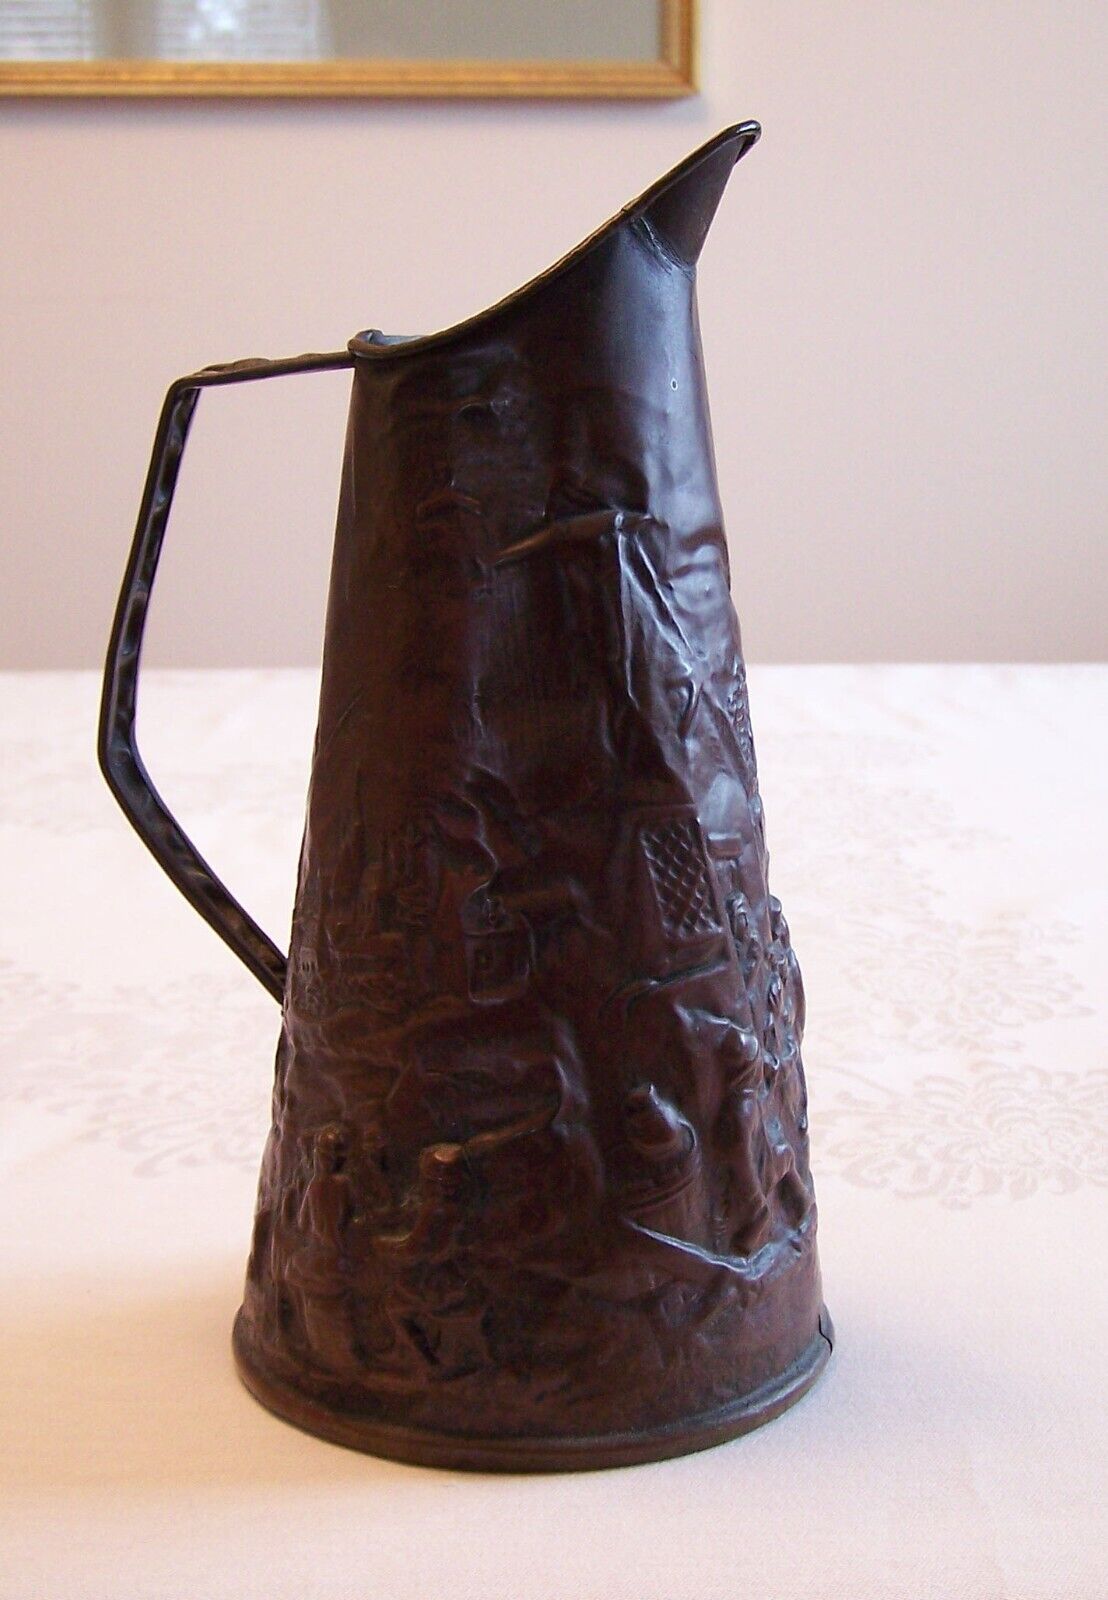 Antique 1800s Repoussé Copper Beer-Tavern Pitcher Scottish Beer-Drinking Scenes